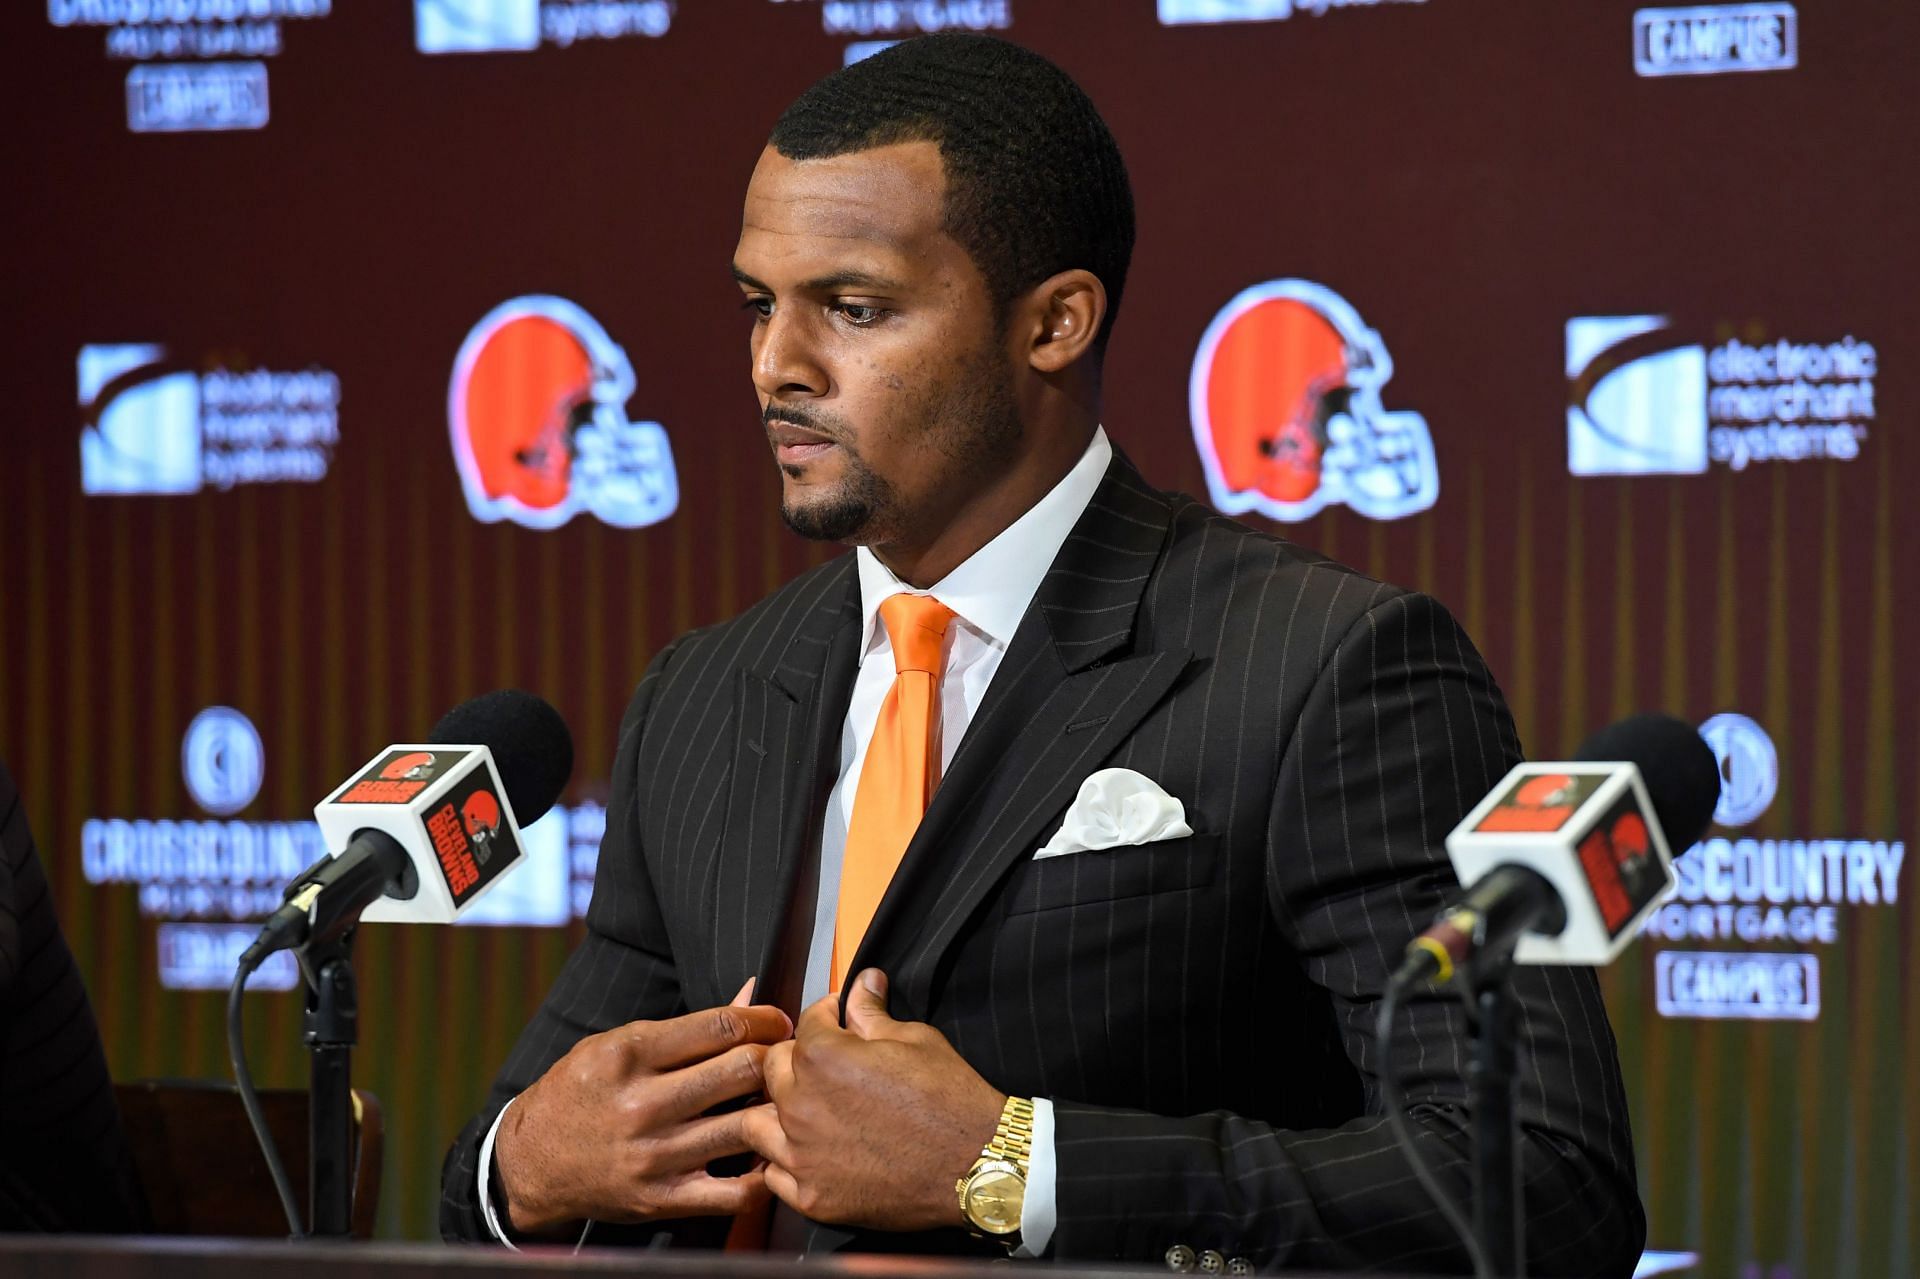 Cleveland Browns quarterback Deshaun Watson could be in a world of trouble